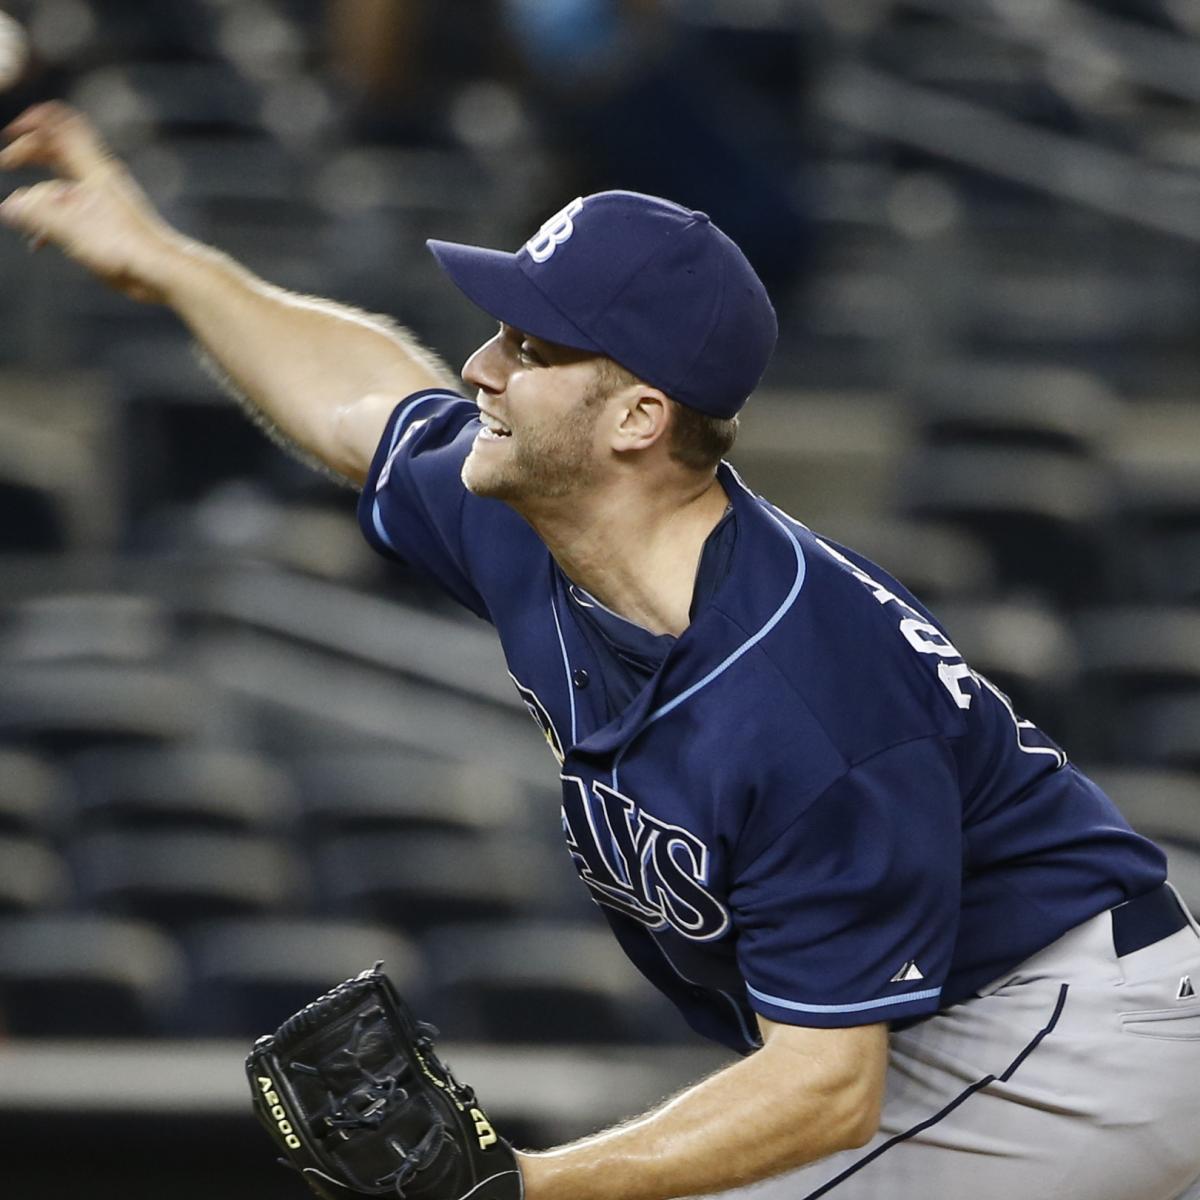 Rays Set MLB Record for Most Team Strikeouts in 1 Calendar Month News